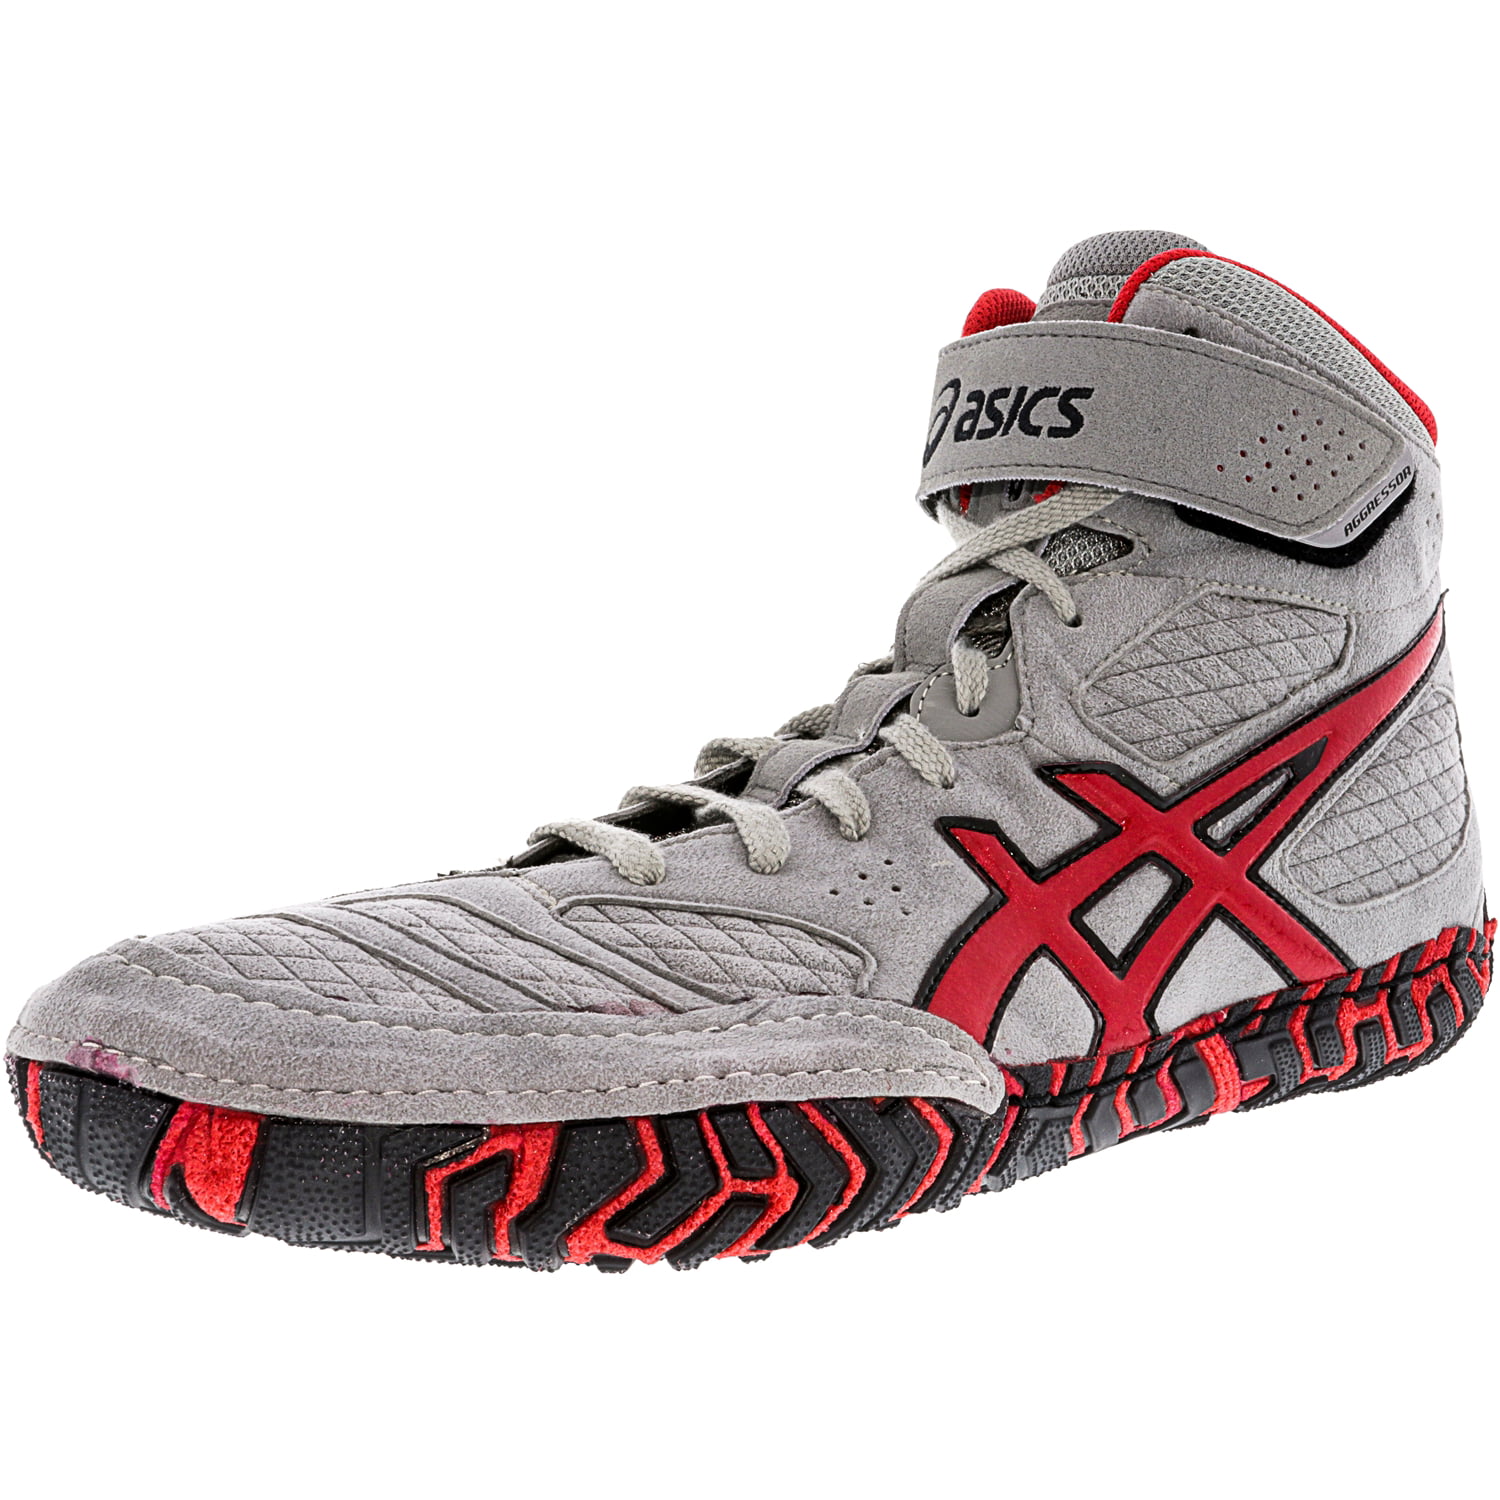 asics aggressor black and red